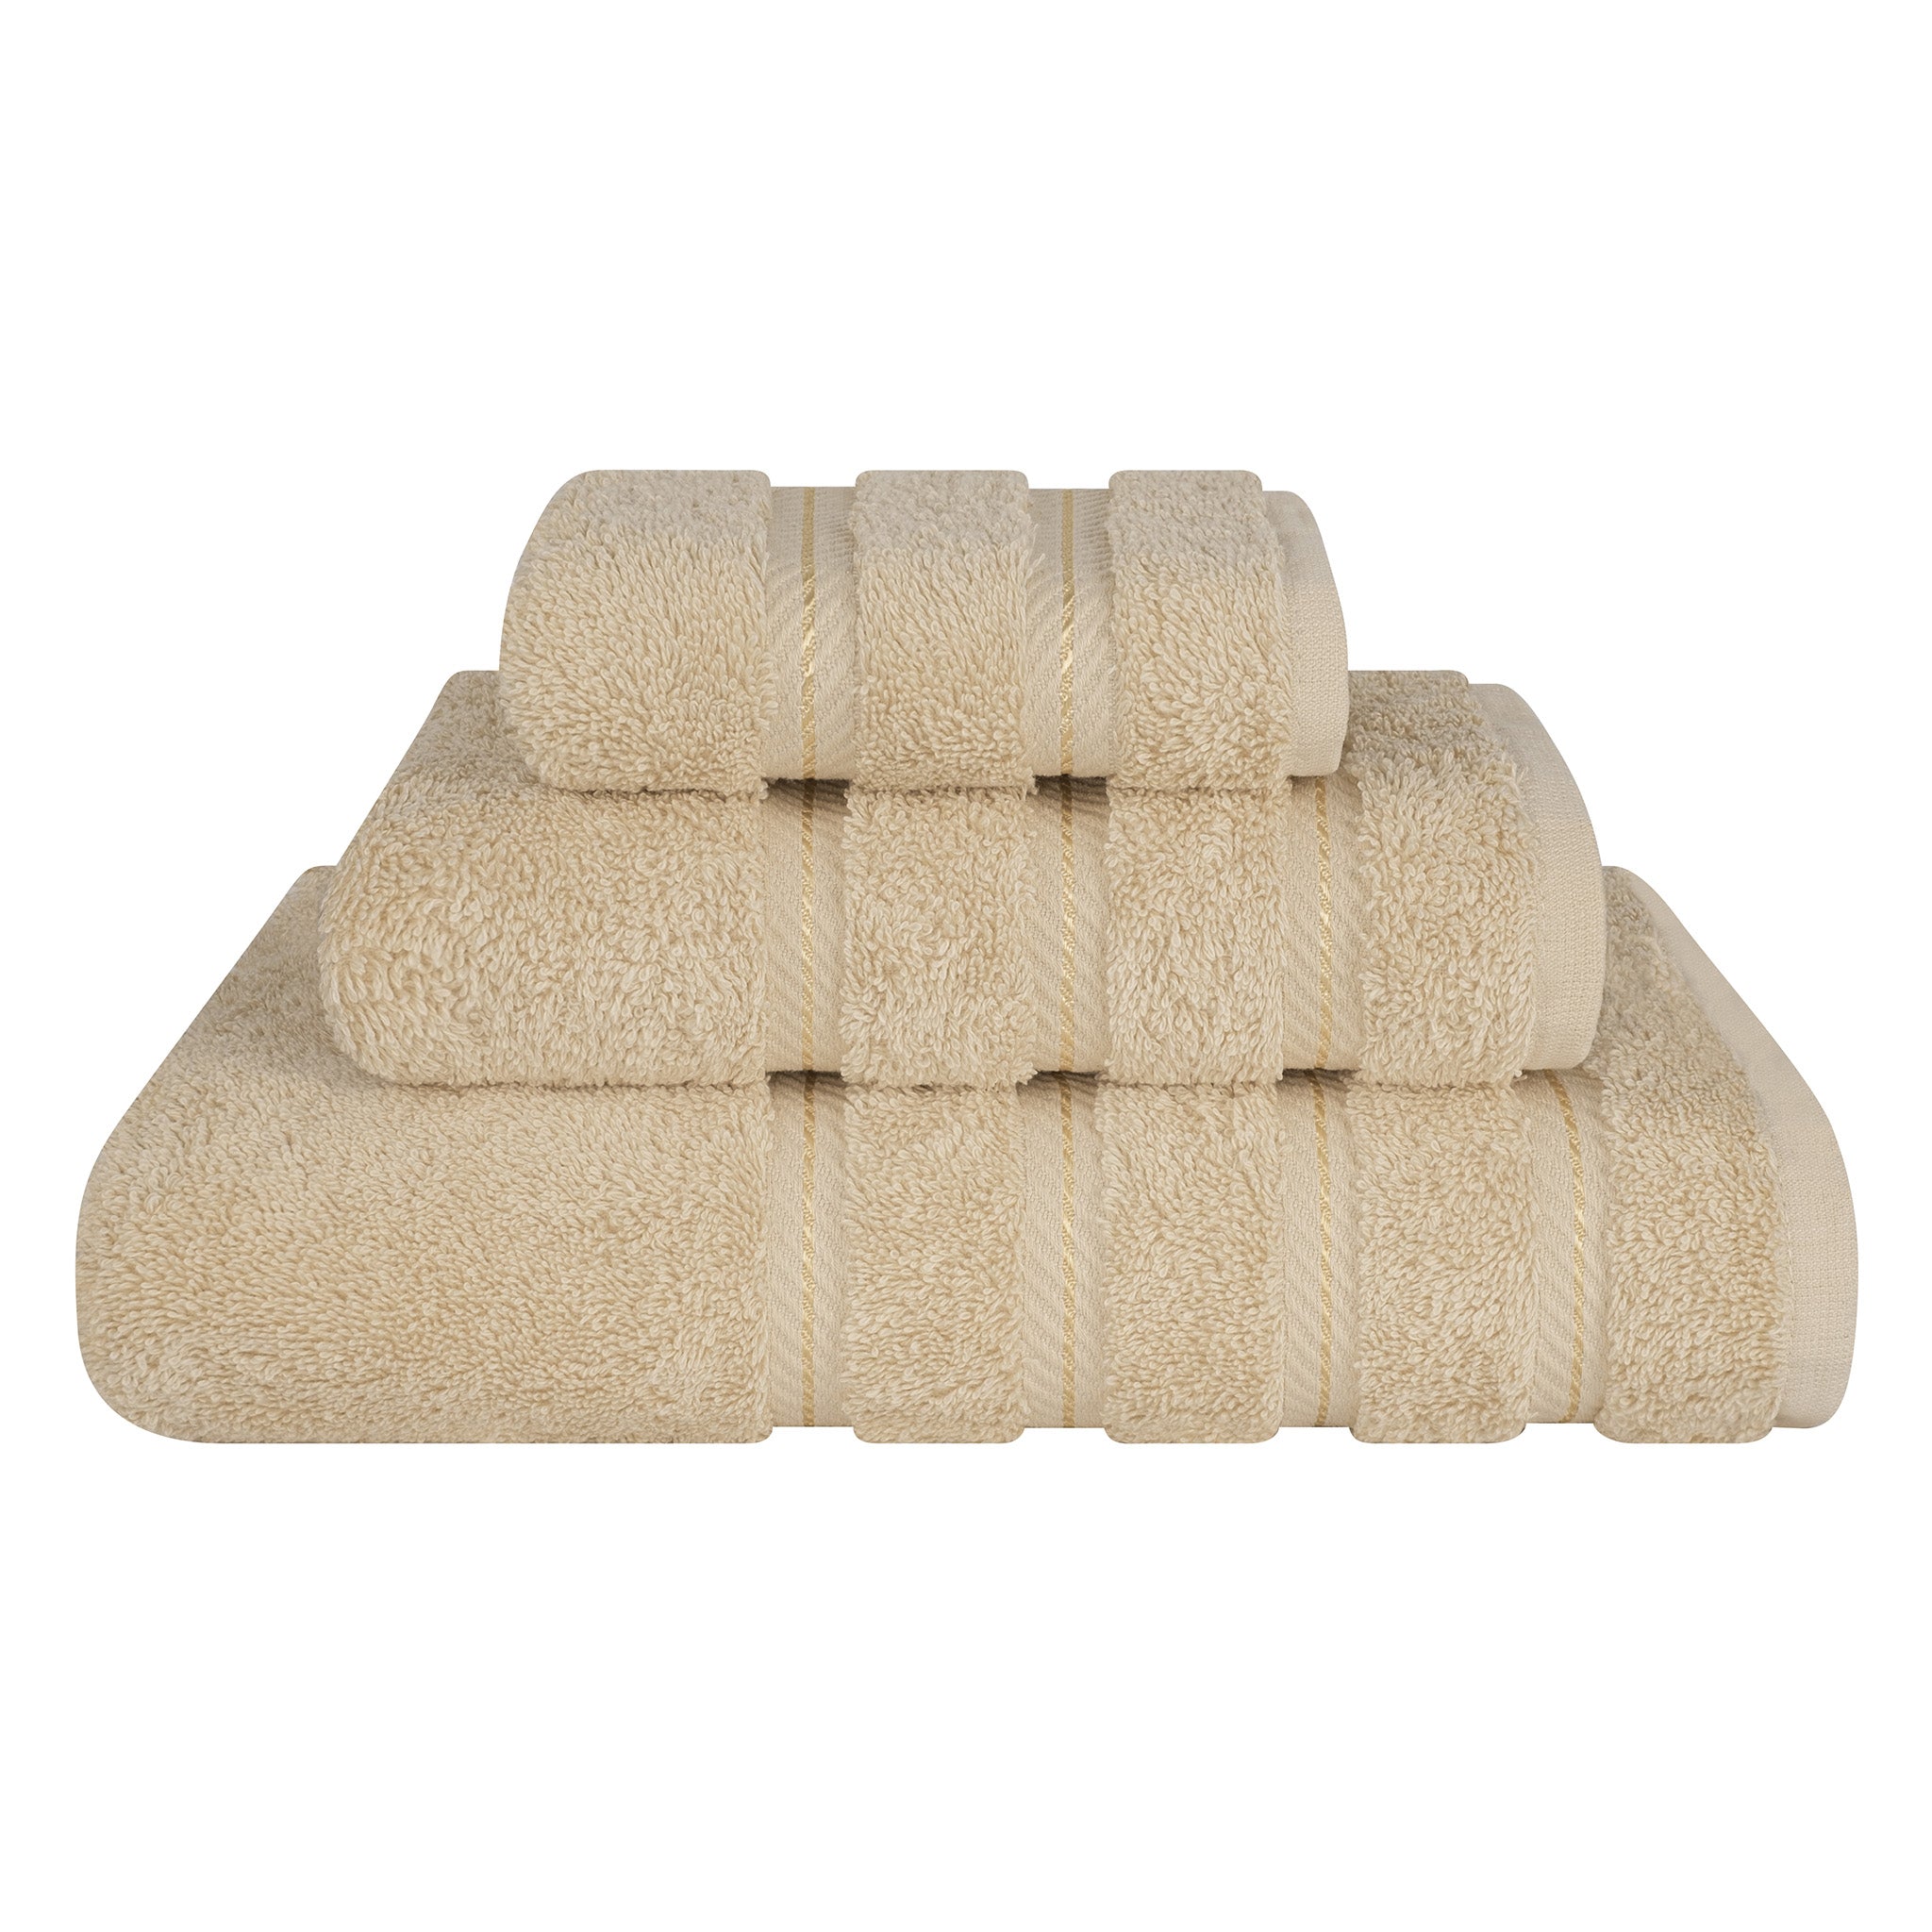 American Soft Linen 3 Piece Luxury Hotel Towel Set 20 set case pack sand-taupe-1